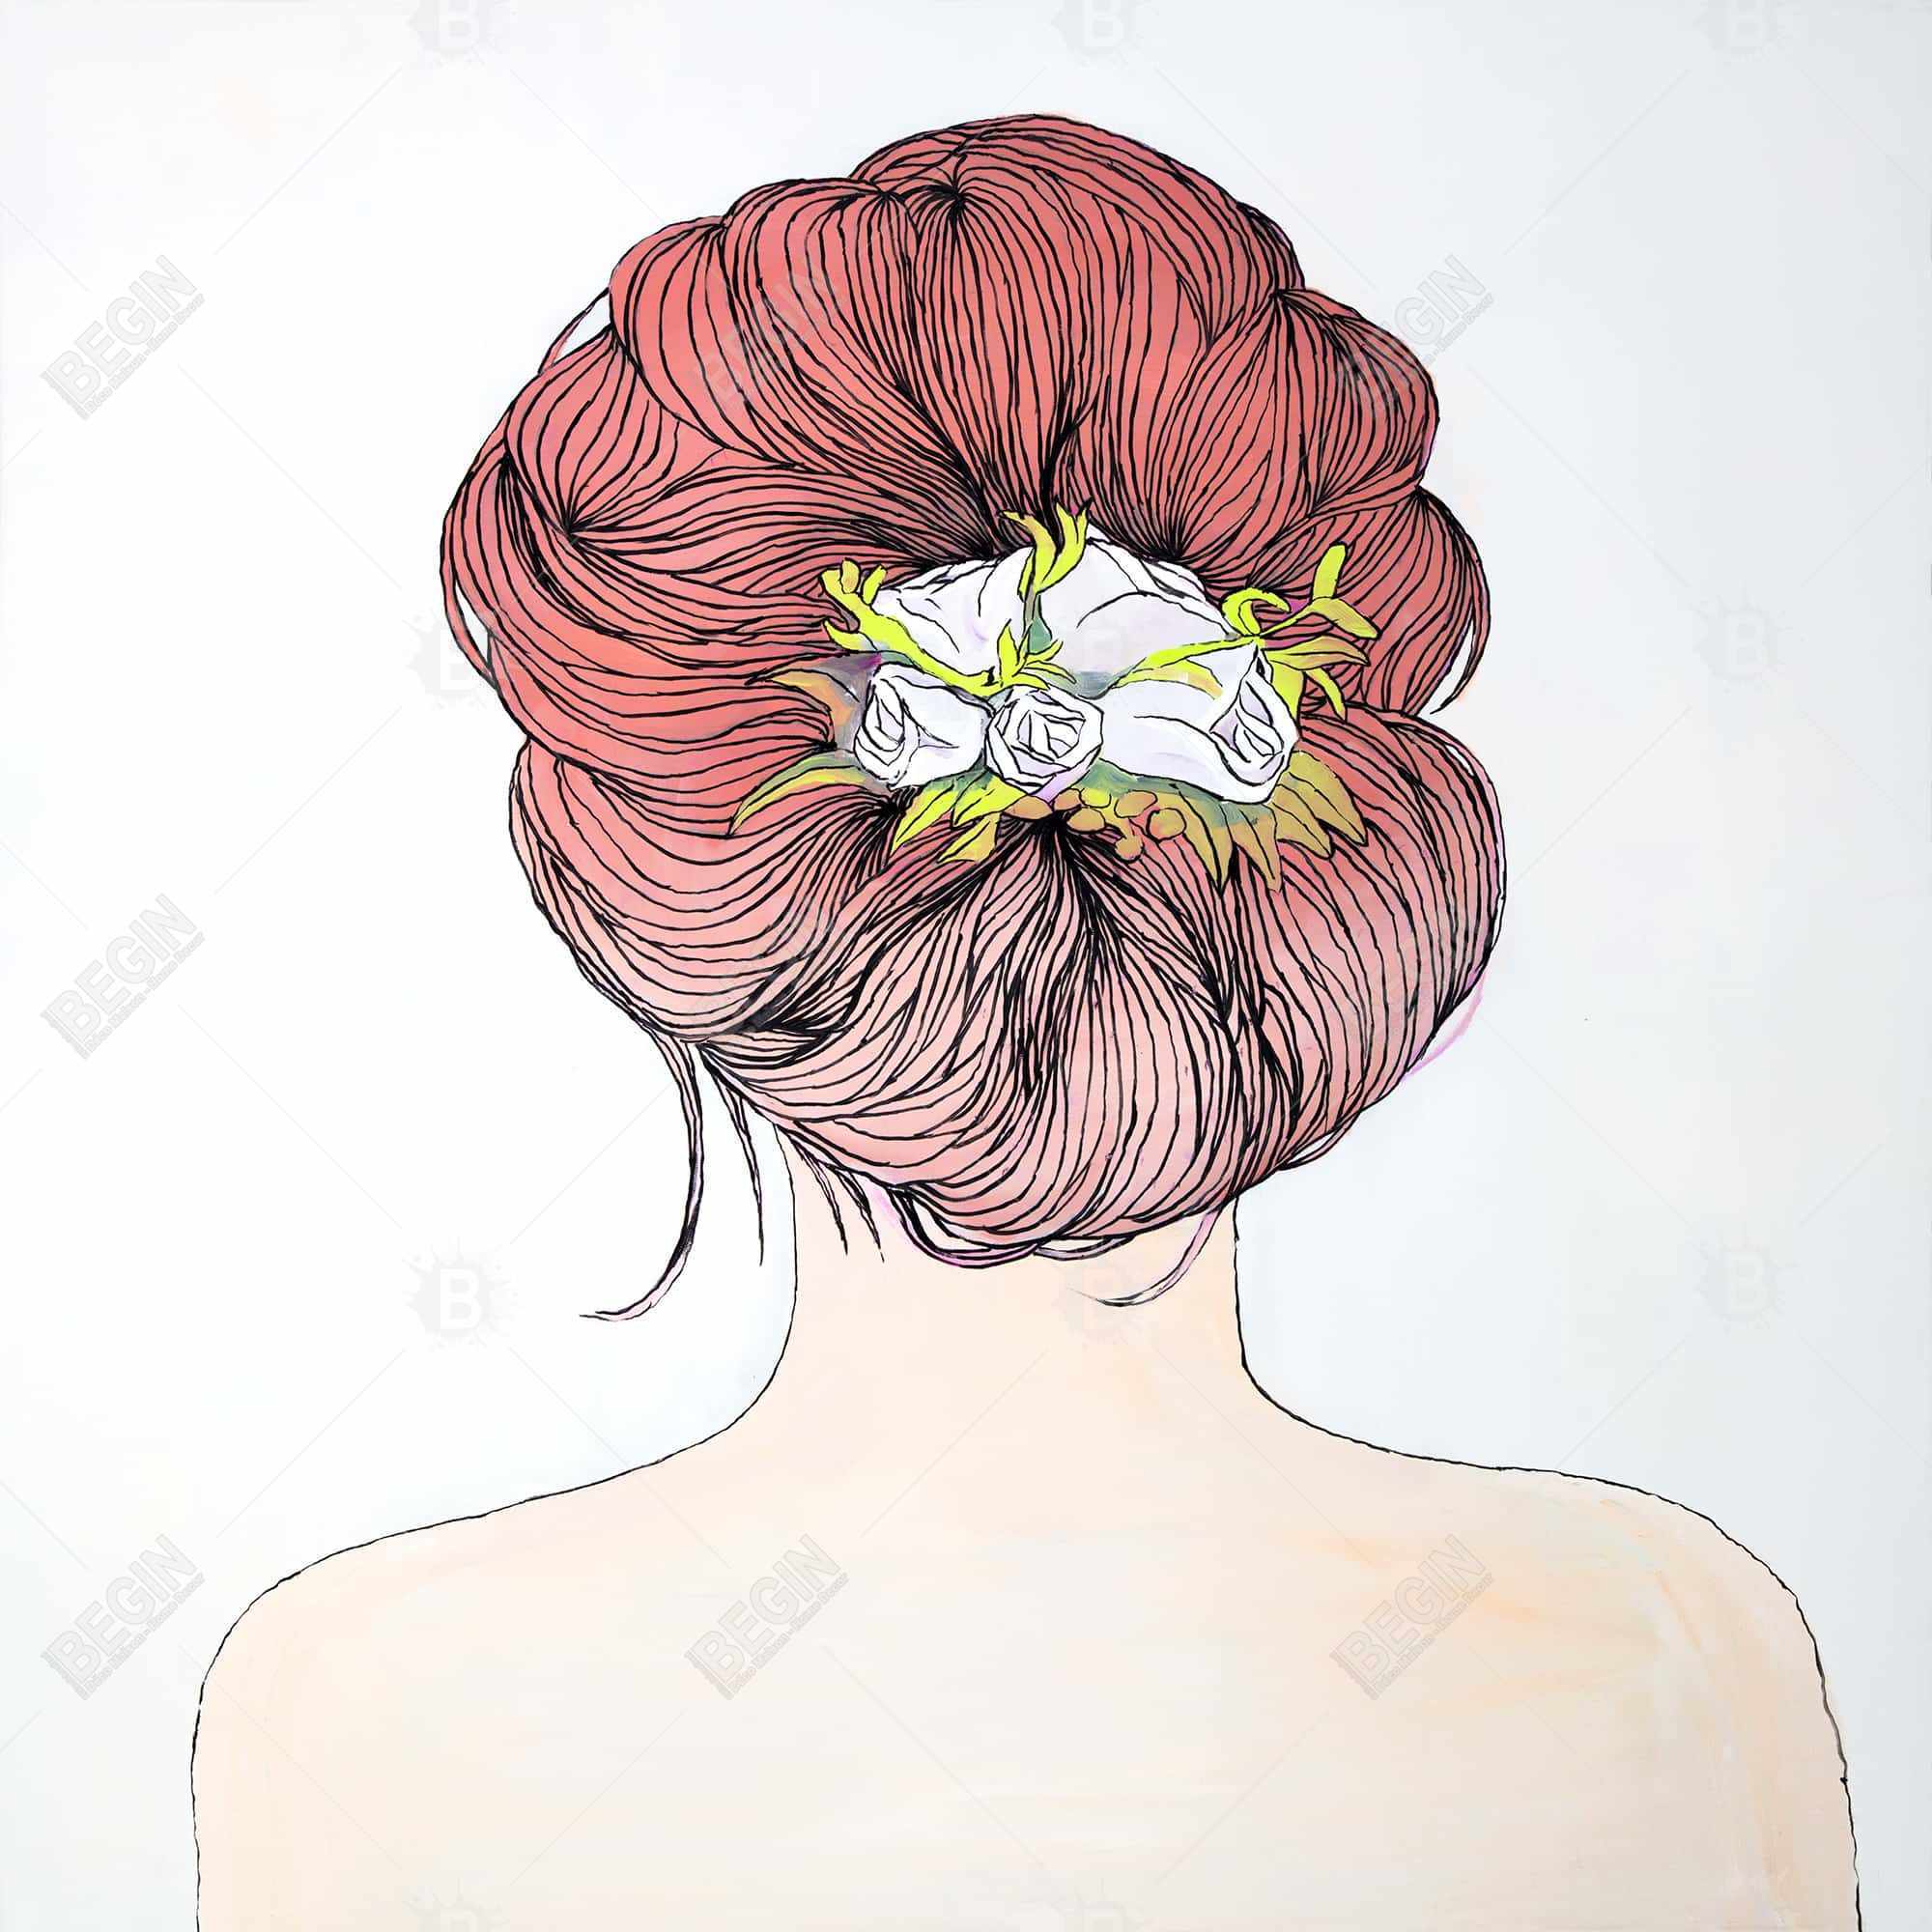 Lady with flowers in her hair